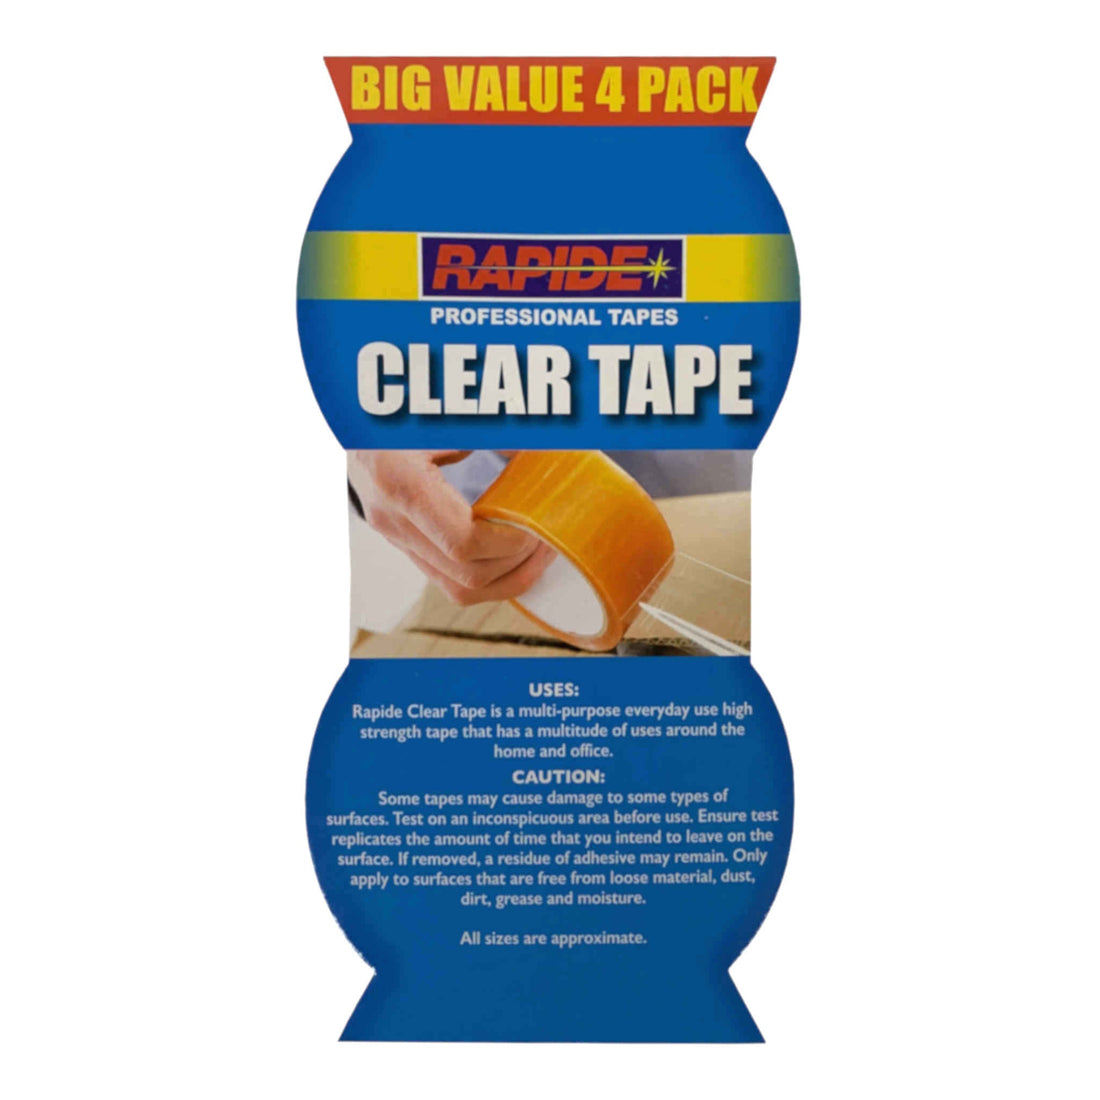 Rapidy Tape | Clear Tape | 4 Pack